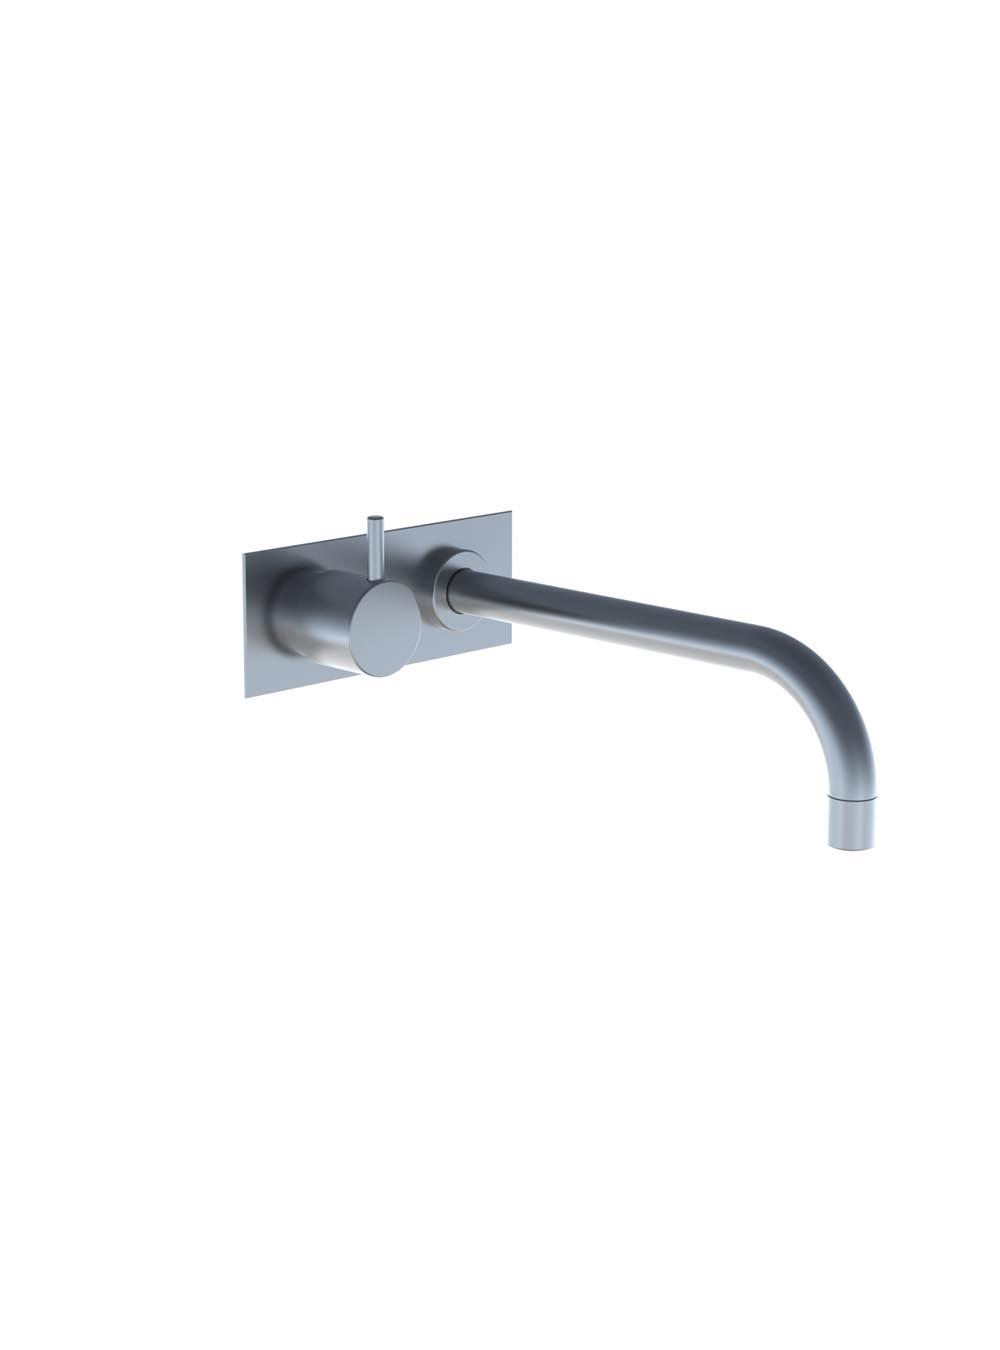 922: Build-in basin tap with ¼ turn ceramic disc technology.922UP = Valve 900.922AP = Handle NR17, 225...